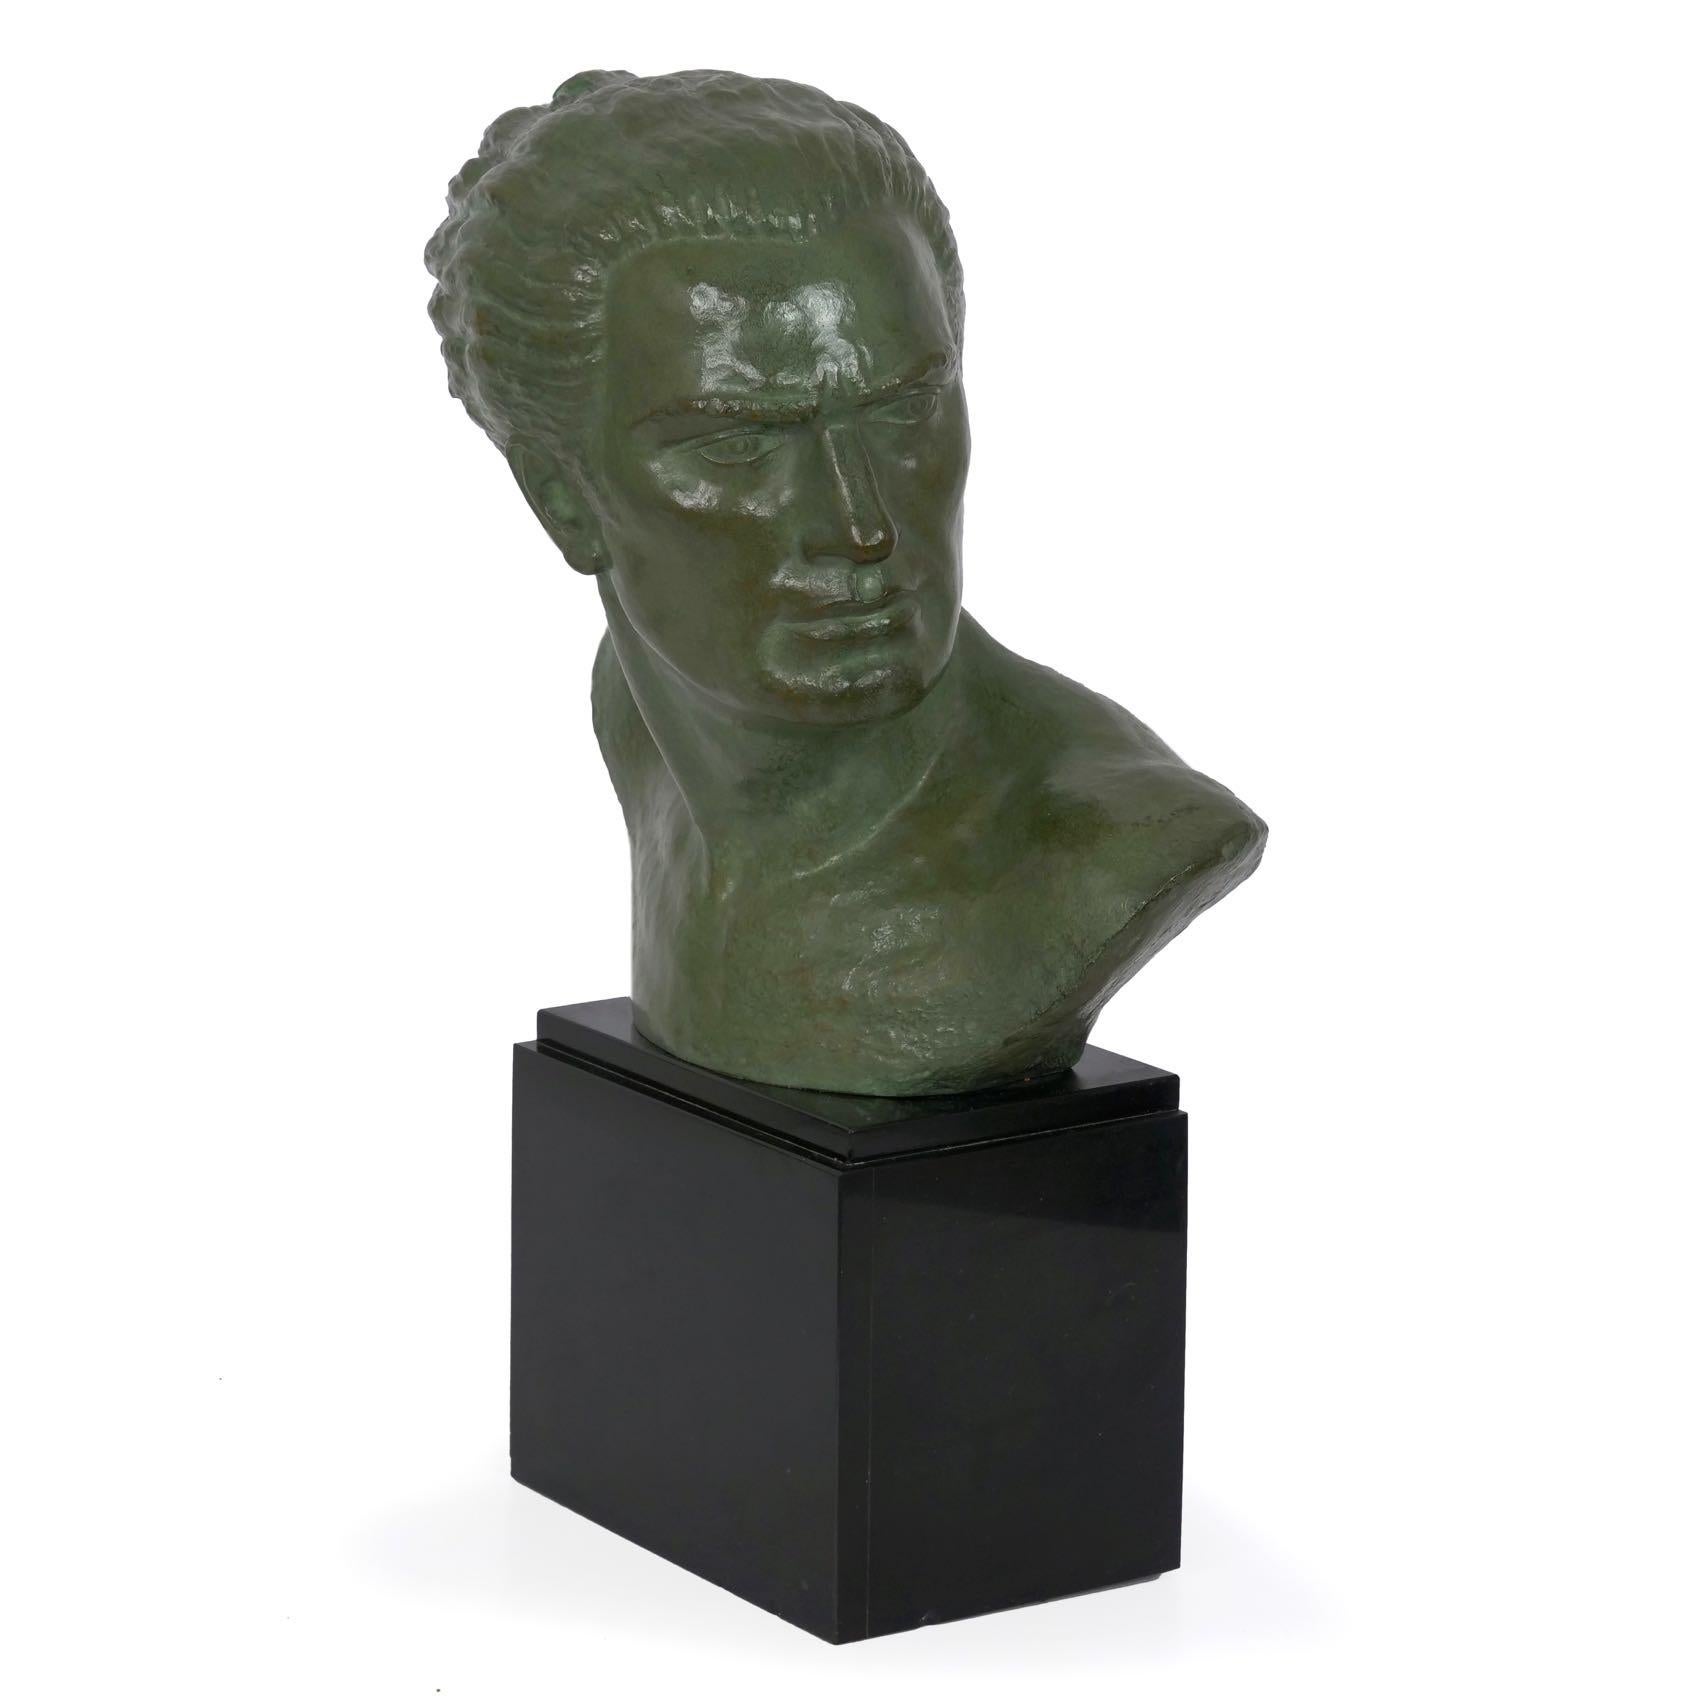 A powerful bust in honor of courageous Aéropostal aviator Jean Mermoz (French, 1901-1936), this moving sculpture was executed in bronze with a cold-painted verde surface patination by Lucien Gibert, circa 1930s.

Born in 1904, Lucien Gibert